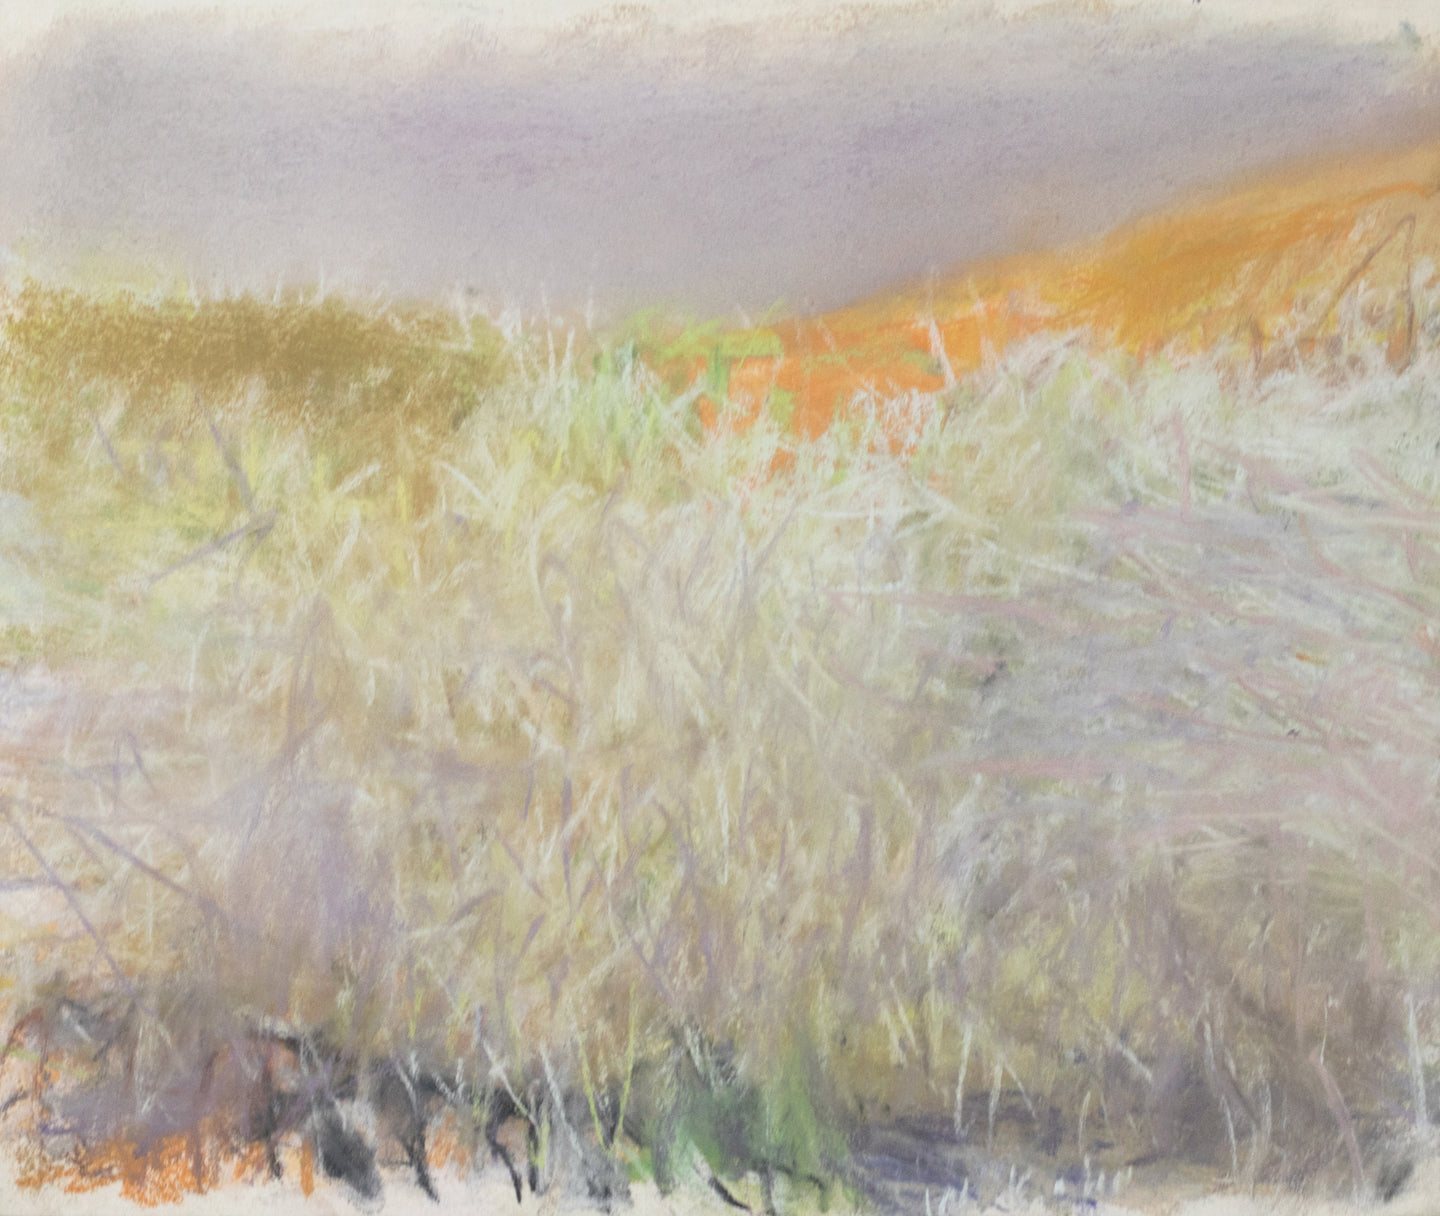 Wolf Kahn (1927-2020) Tangle before a Yellow Hill, 2006  Pastel on paper  14 x 17 inches- Unframed This abstract painting of a landscape is a fusion of shades of purple, oranges, whites, and greens. Available at Manolis Projects Gallery